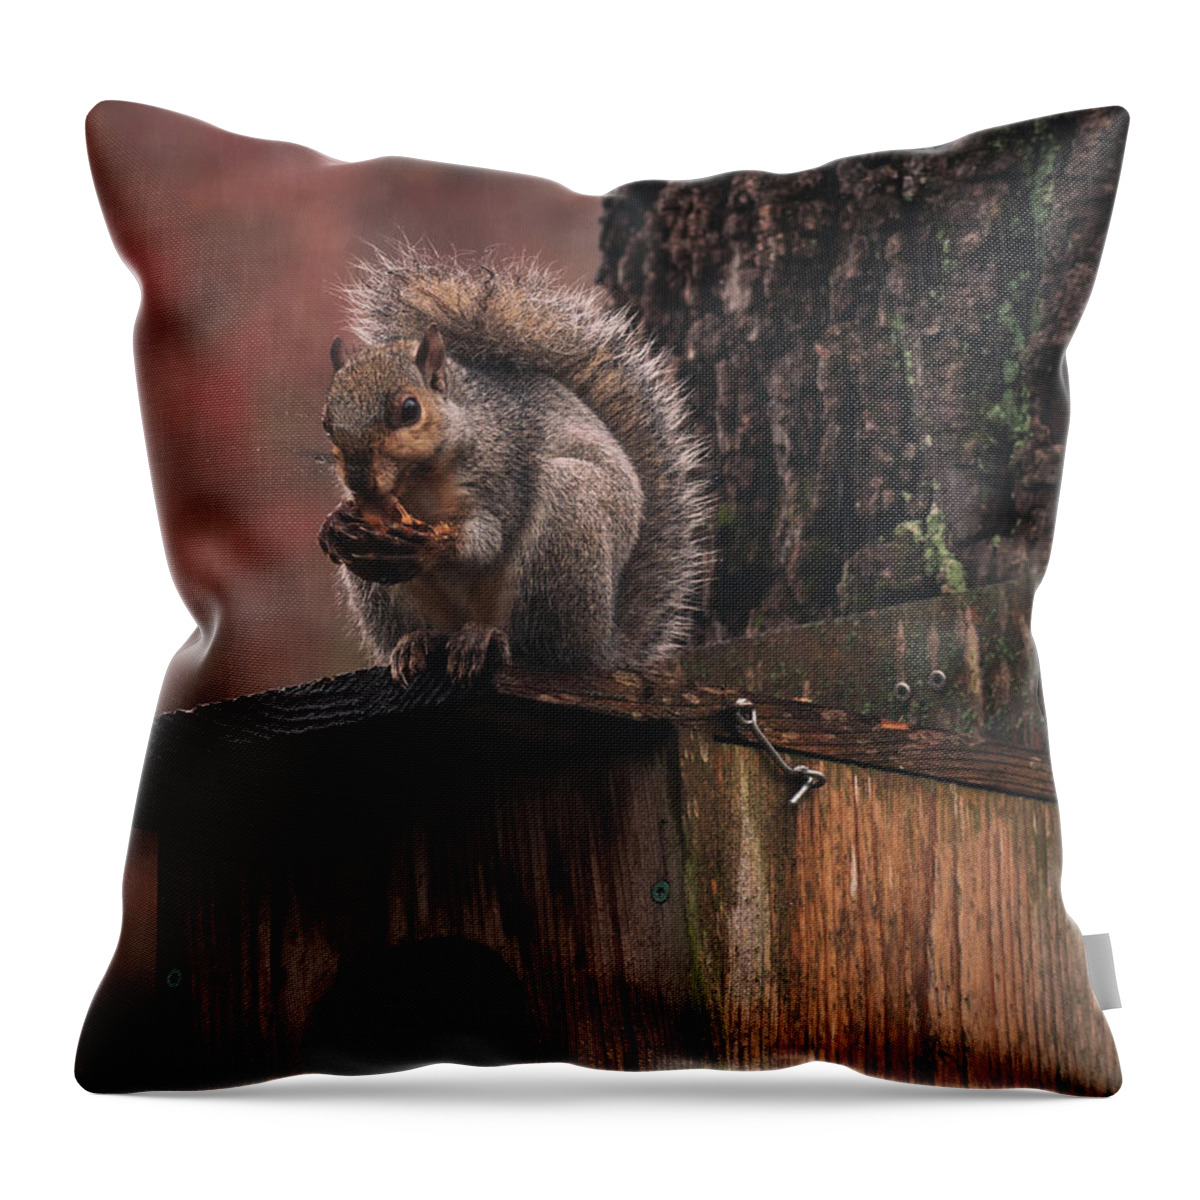 Squirrel Throw Pillow featuring the photograph Squirrel on a Birdhouse - Rainy Autumn by Jason Fink